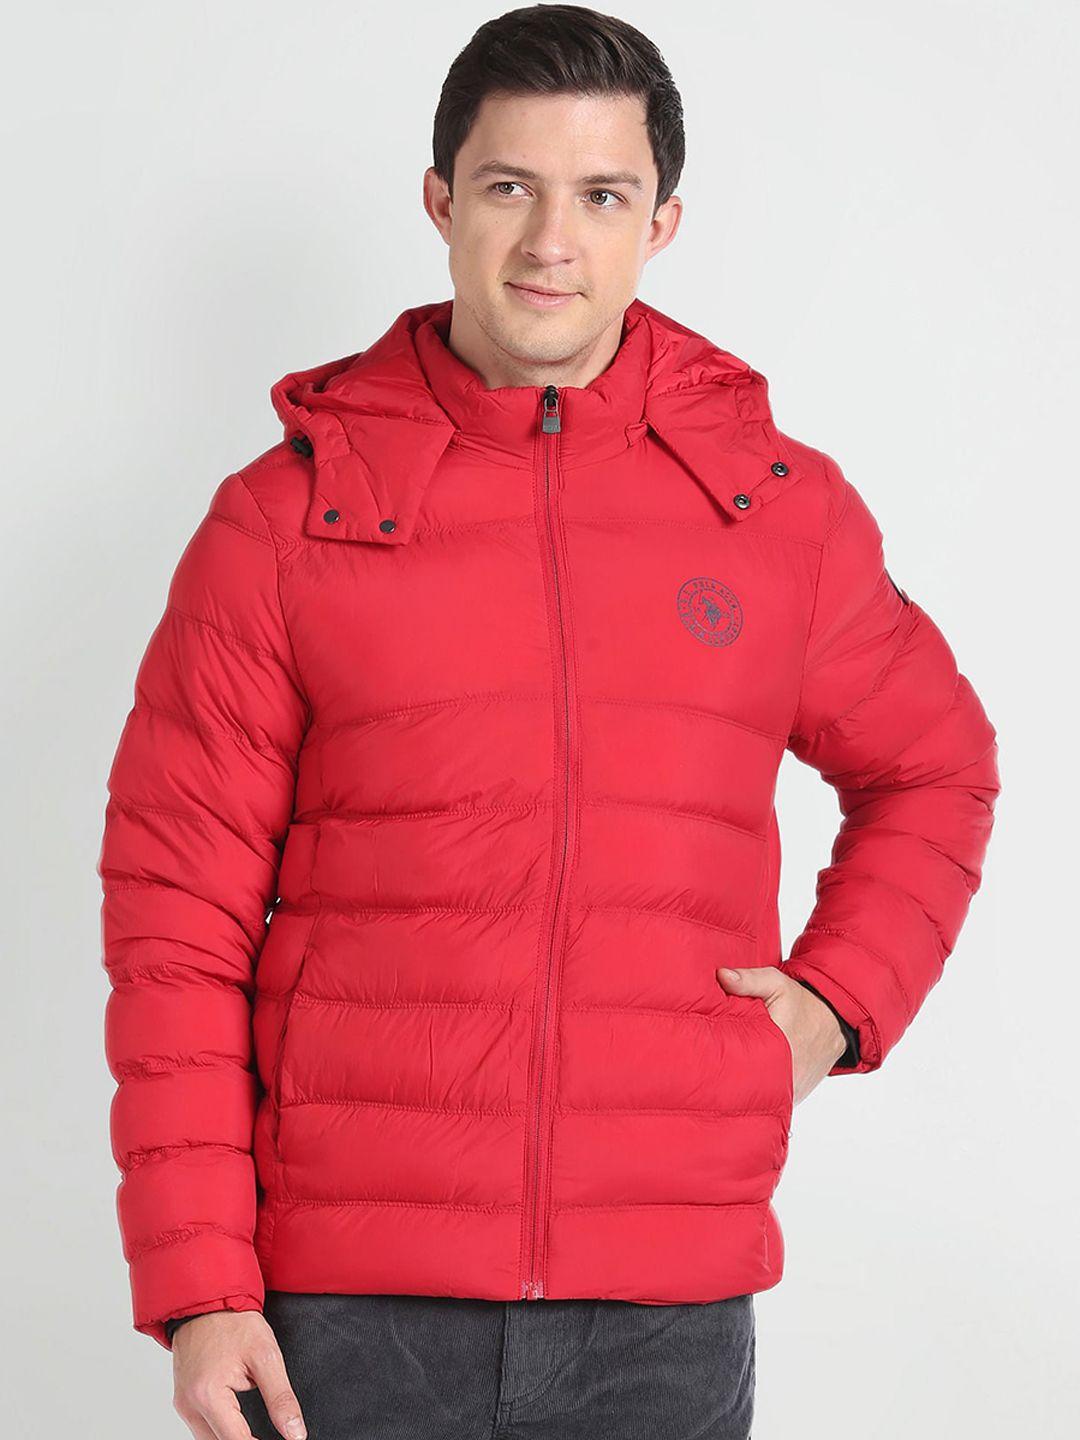 u.s. polo assn. denim co. hooded quilted jacket with zip detail